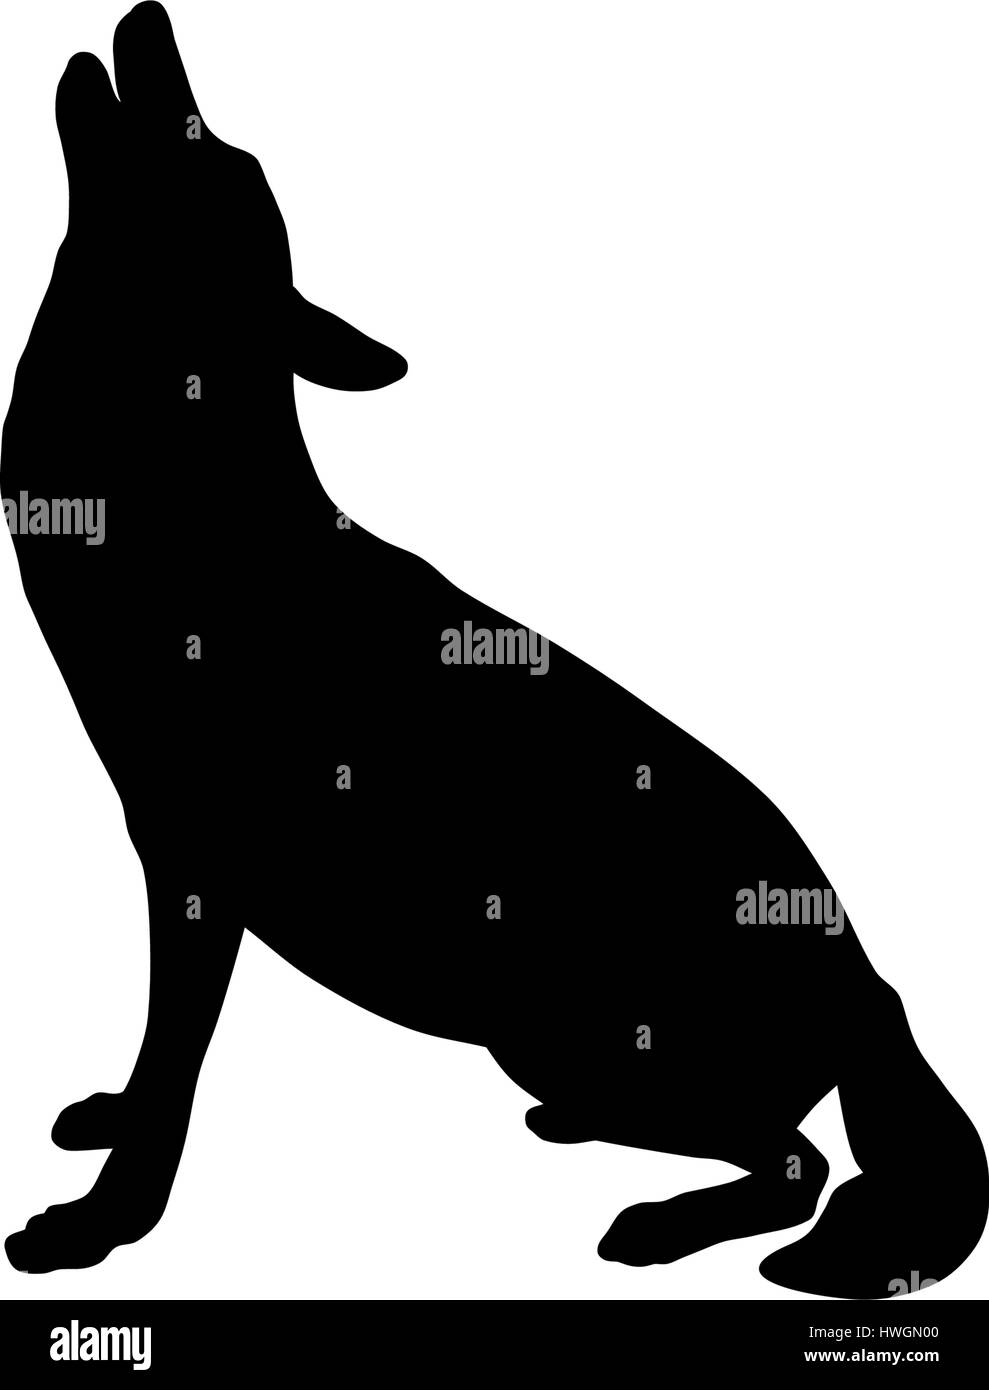 Vector illustration of wolf silhouette Stock Vector